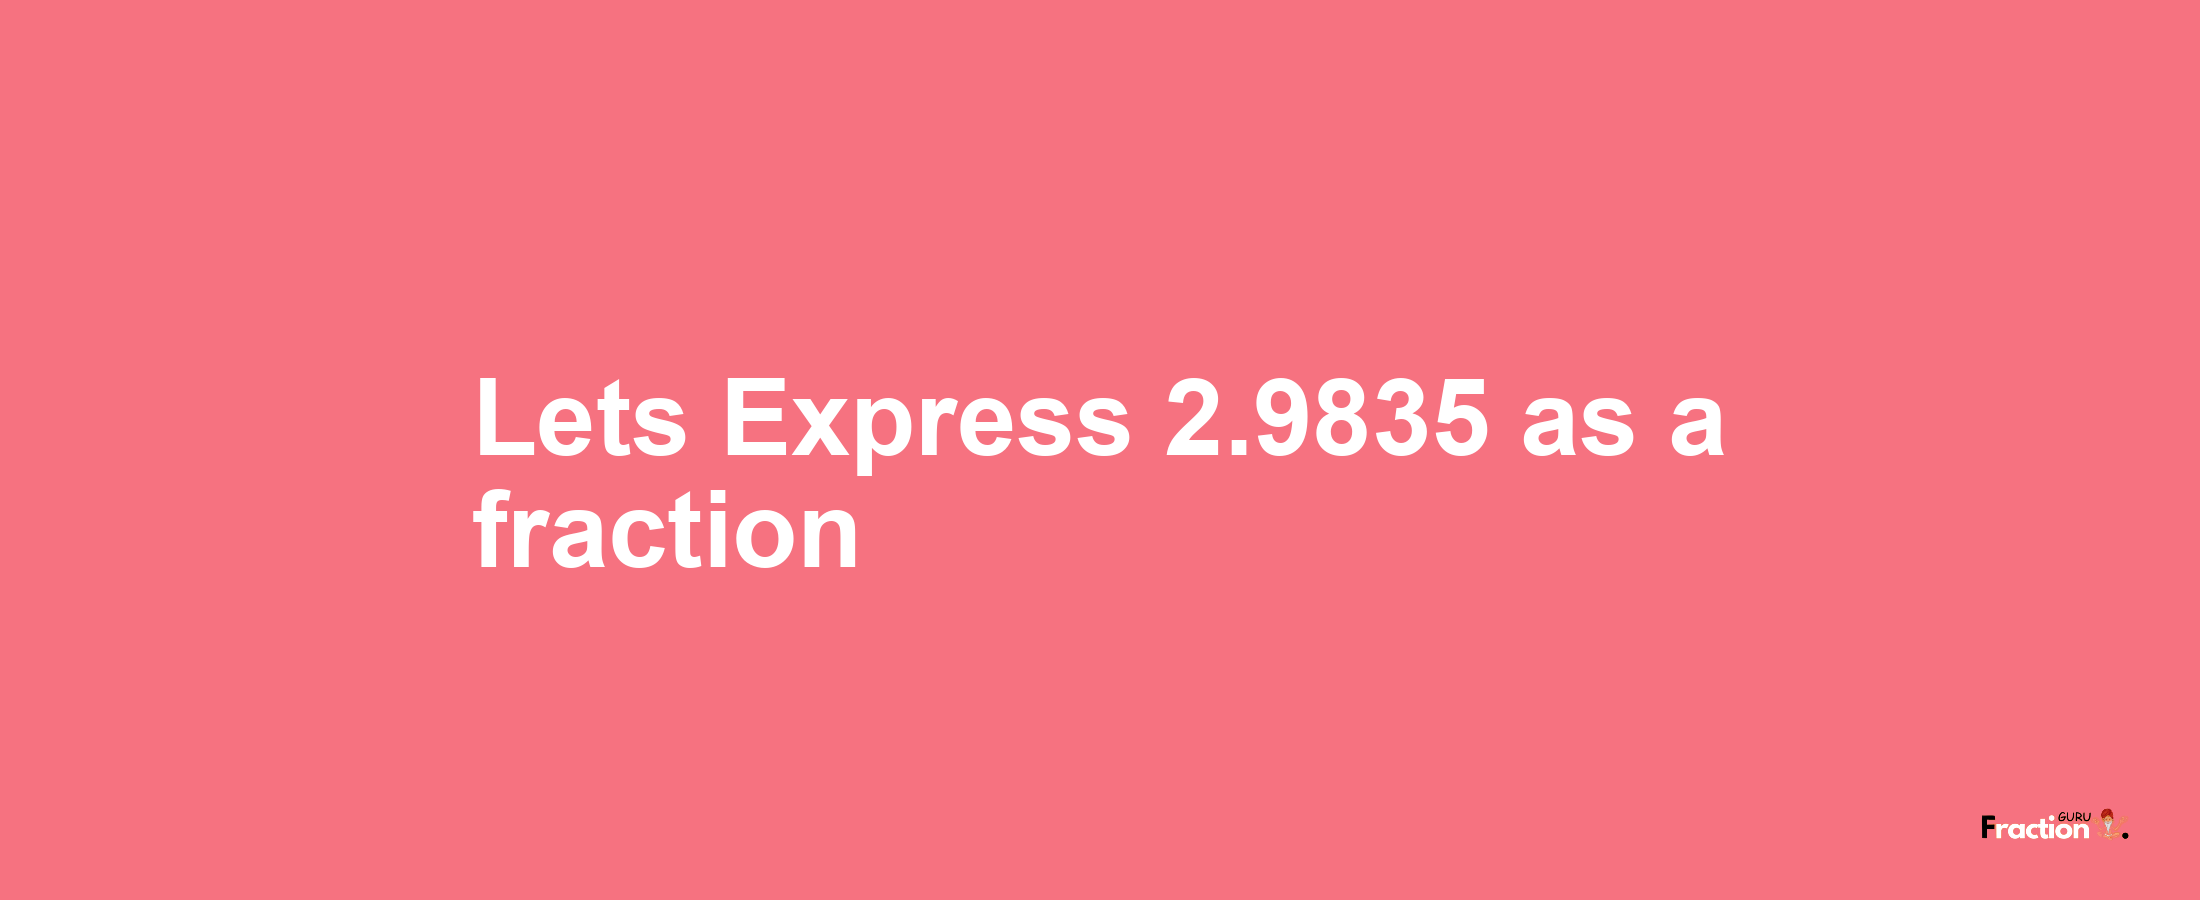 Lets Express 2.9835 as afraction